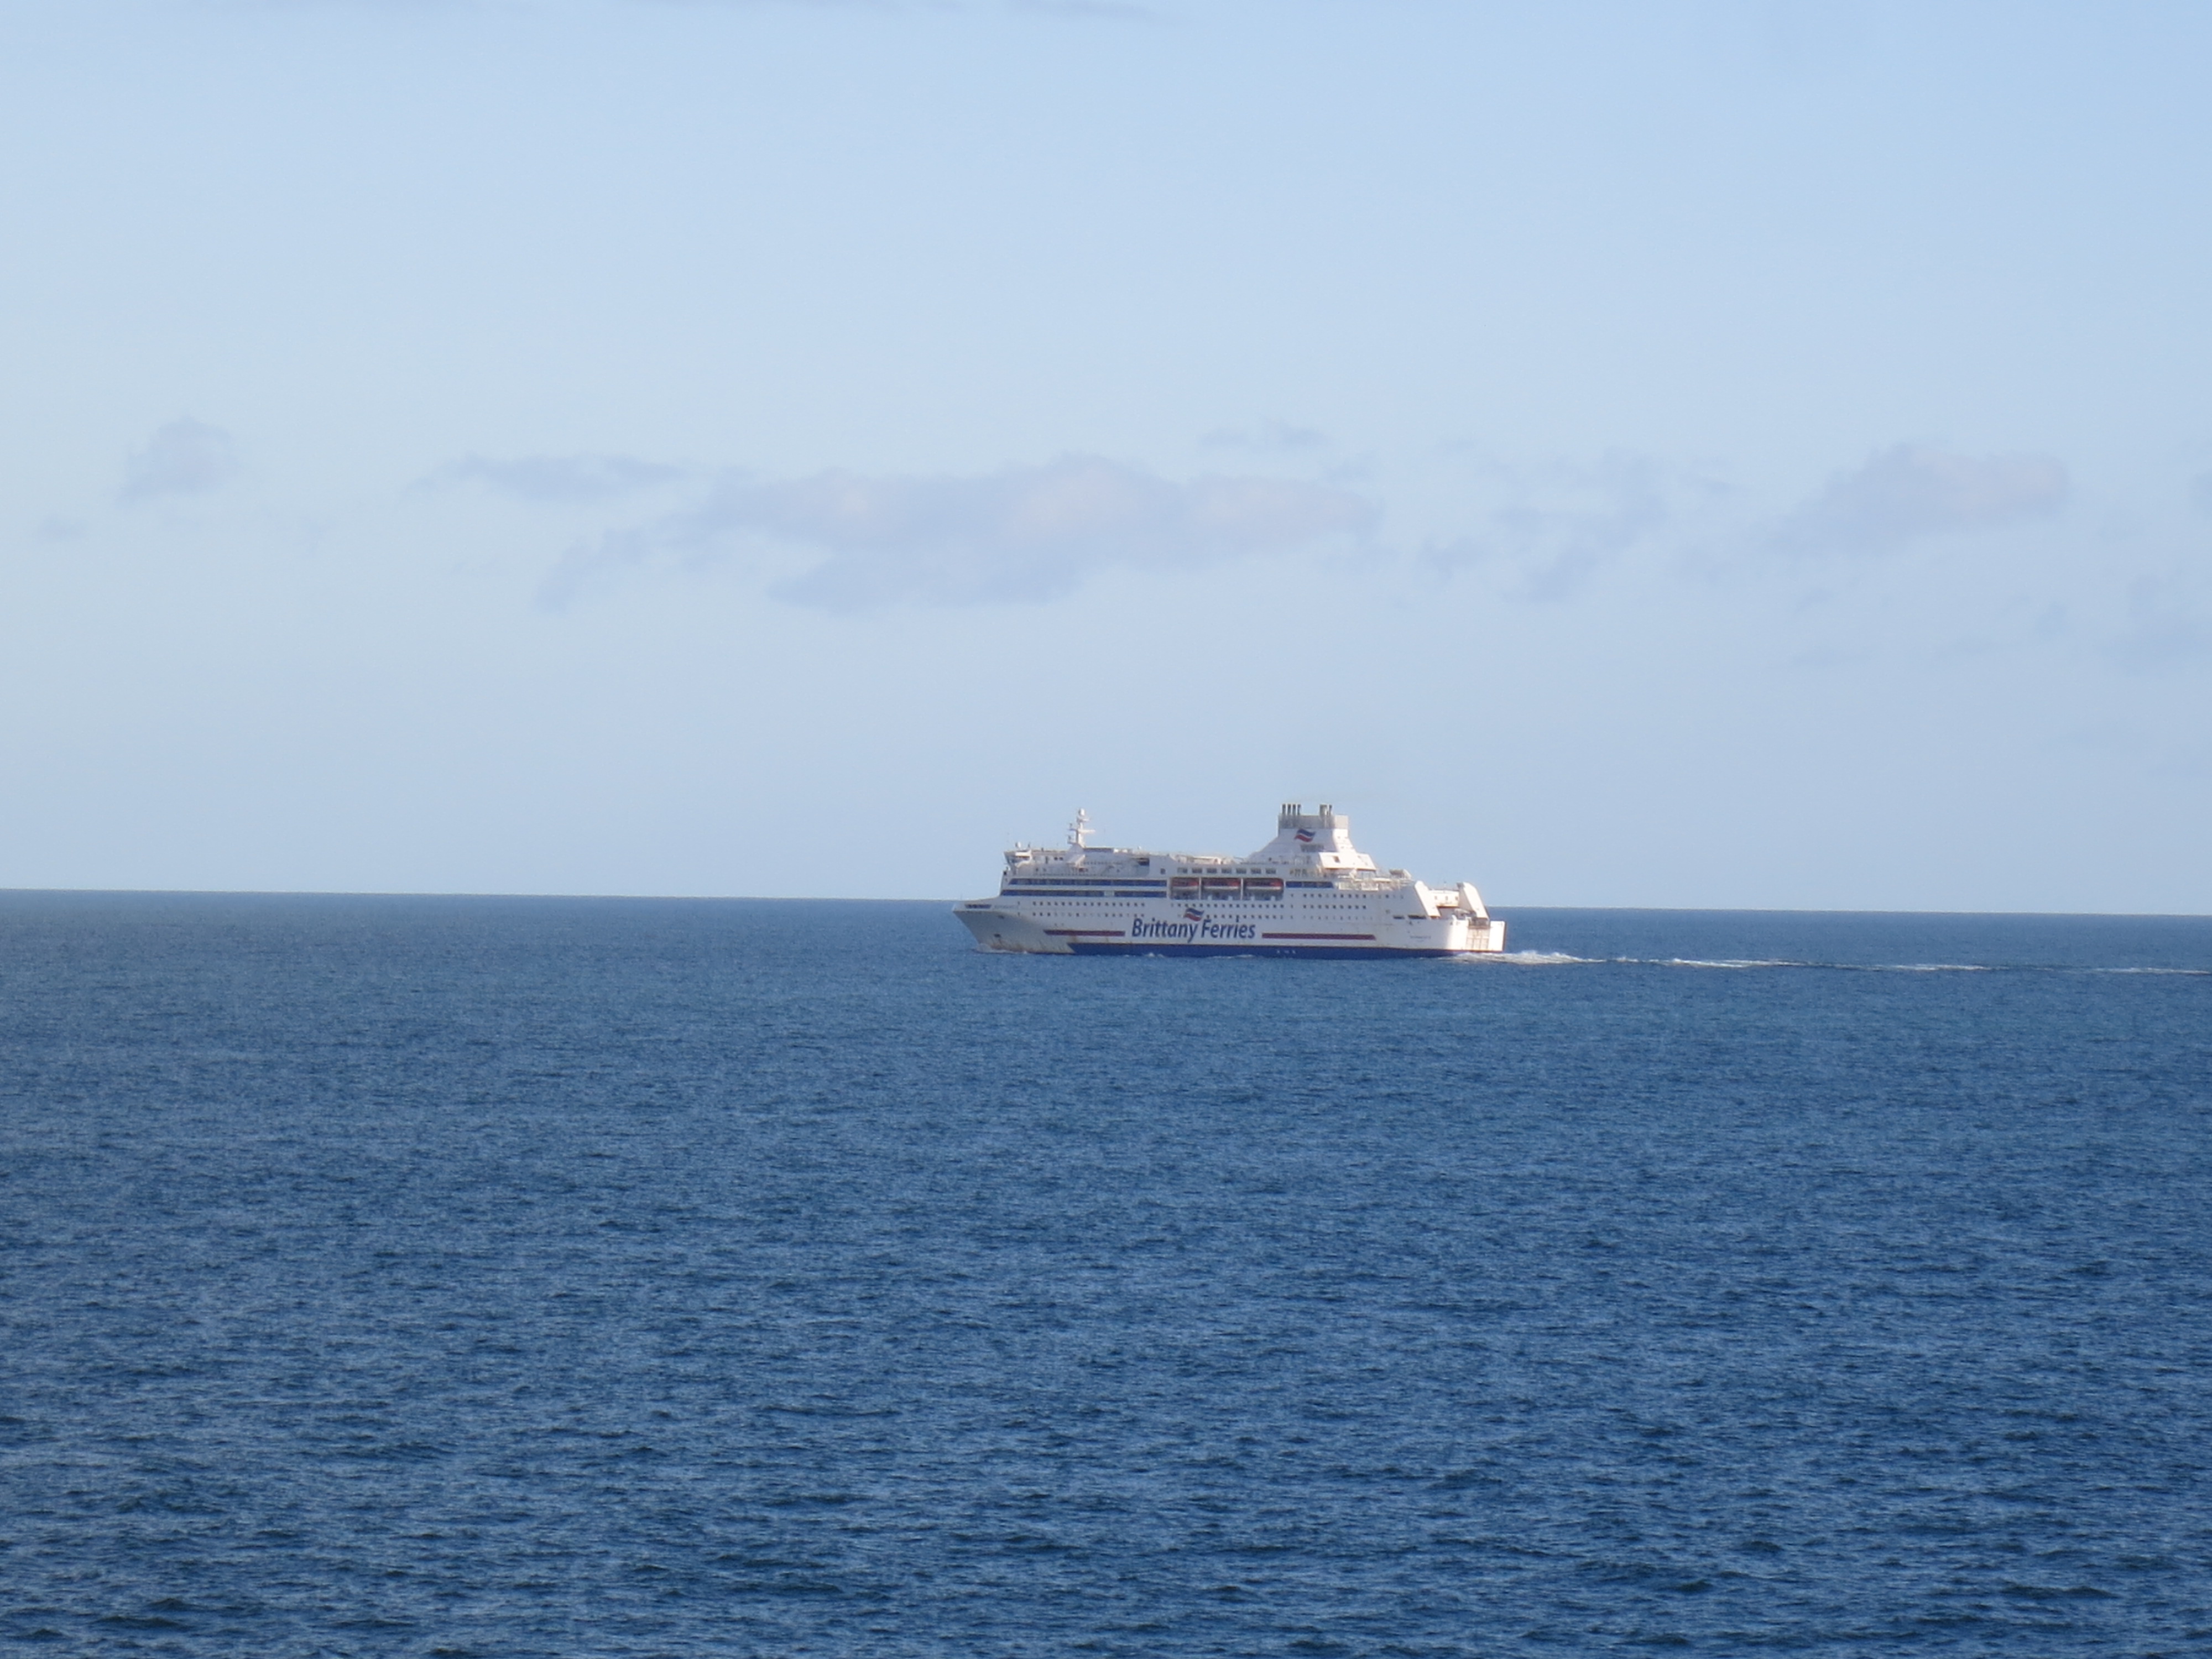 Brittany Ferries - a relaxing way to travel